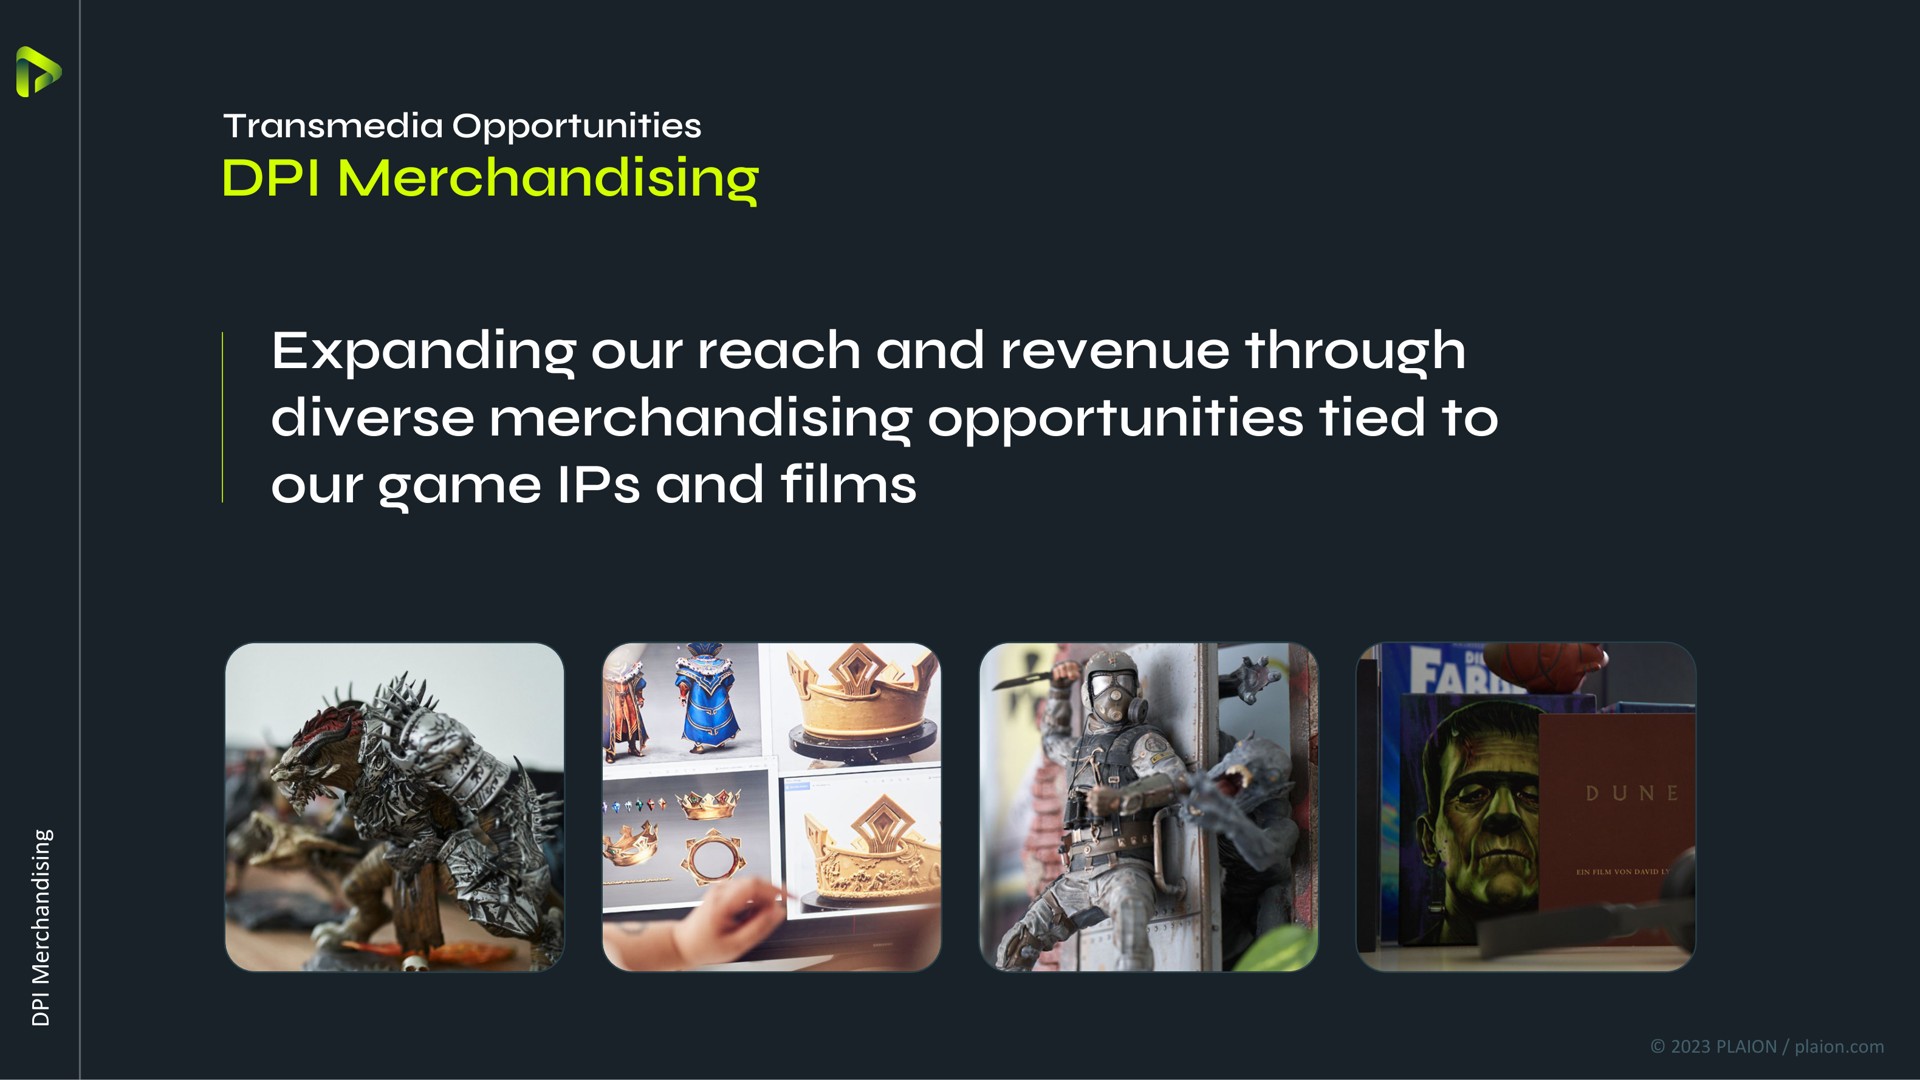 merchandising expanding our reach and revenue through diverse merchandising opportunities tied to our game and films | Embracer Group